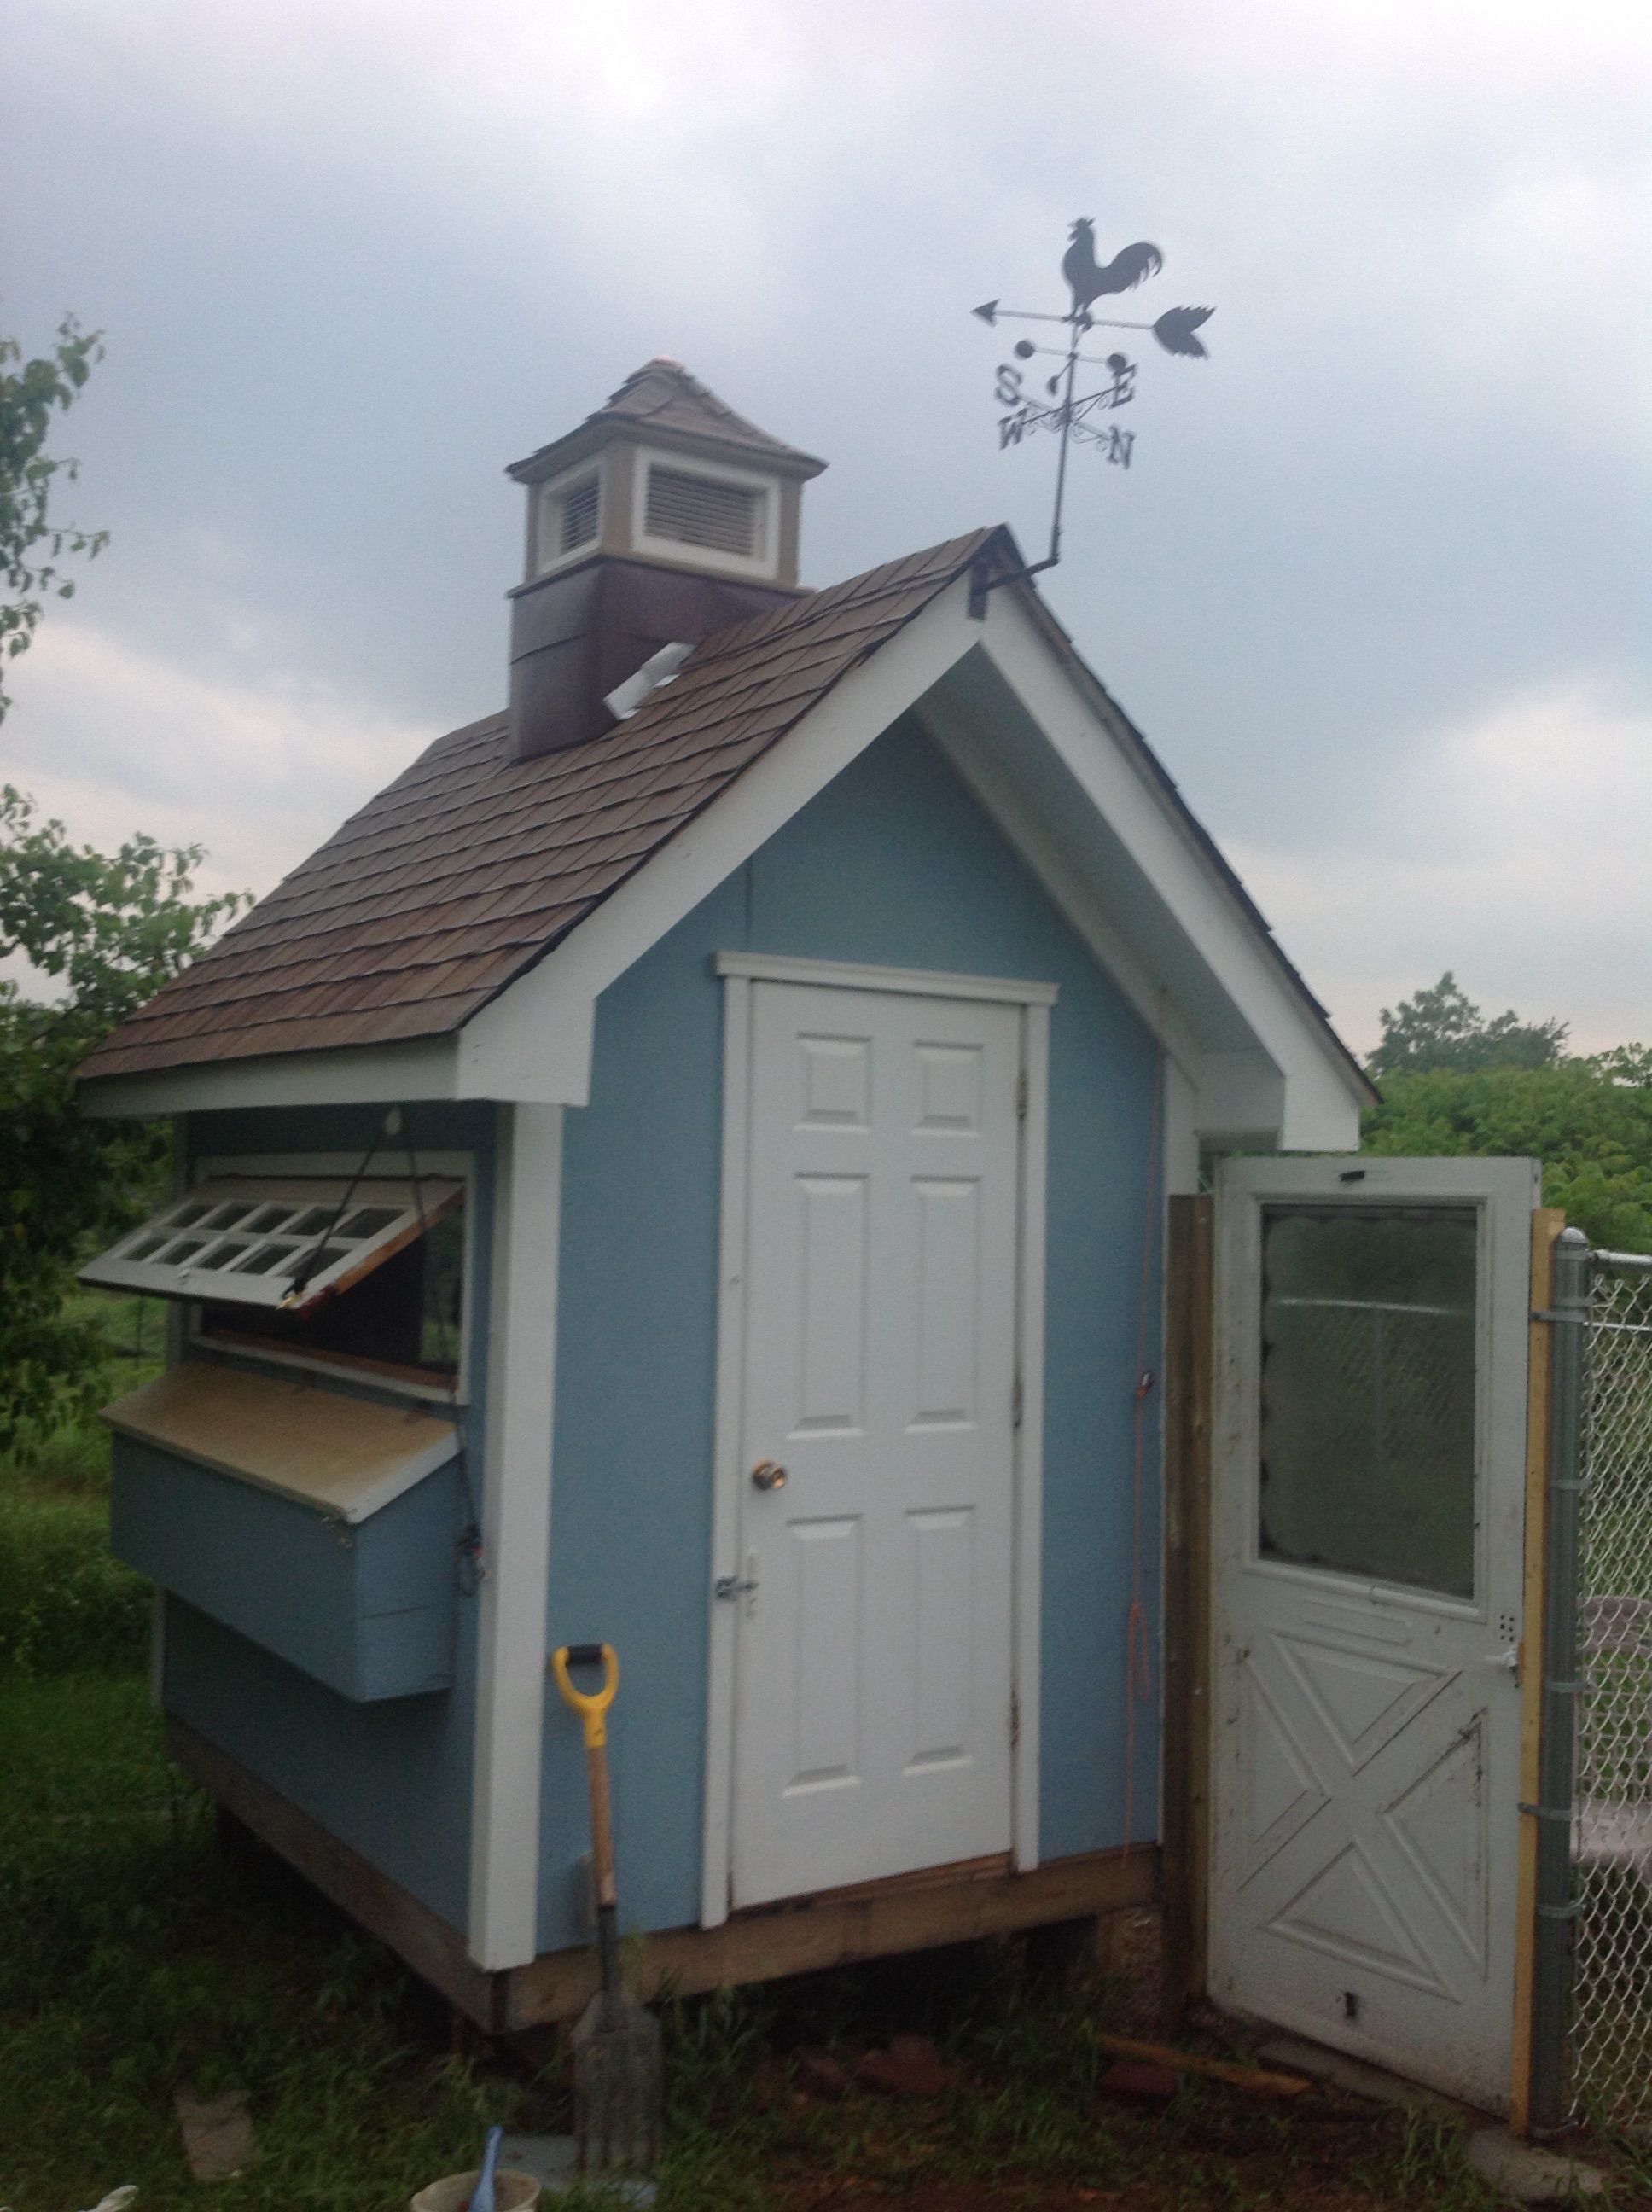 Final touch on the coop with a weather vane. Started the run with an old screen door and used chain link fencing.